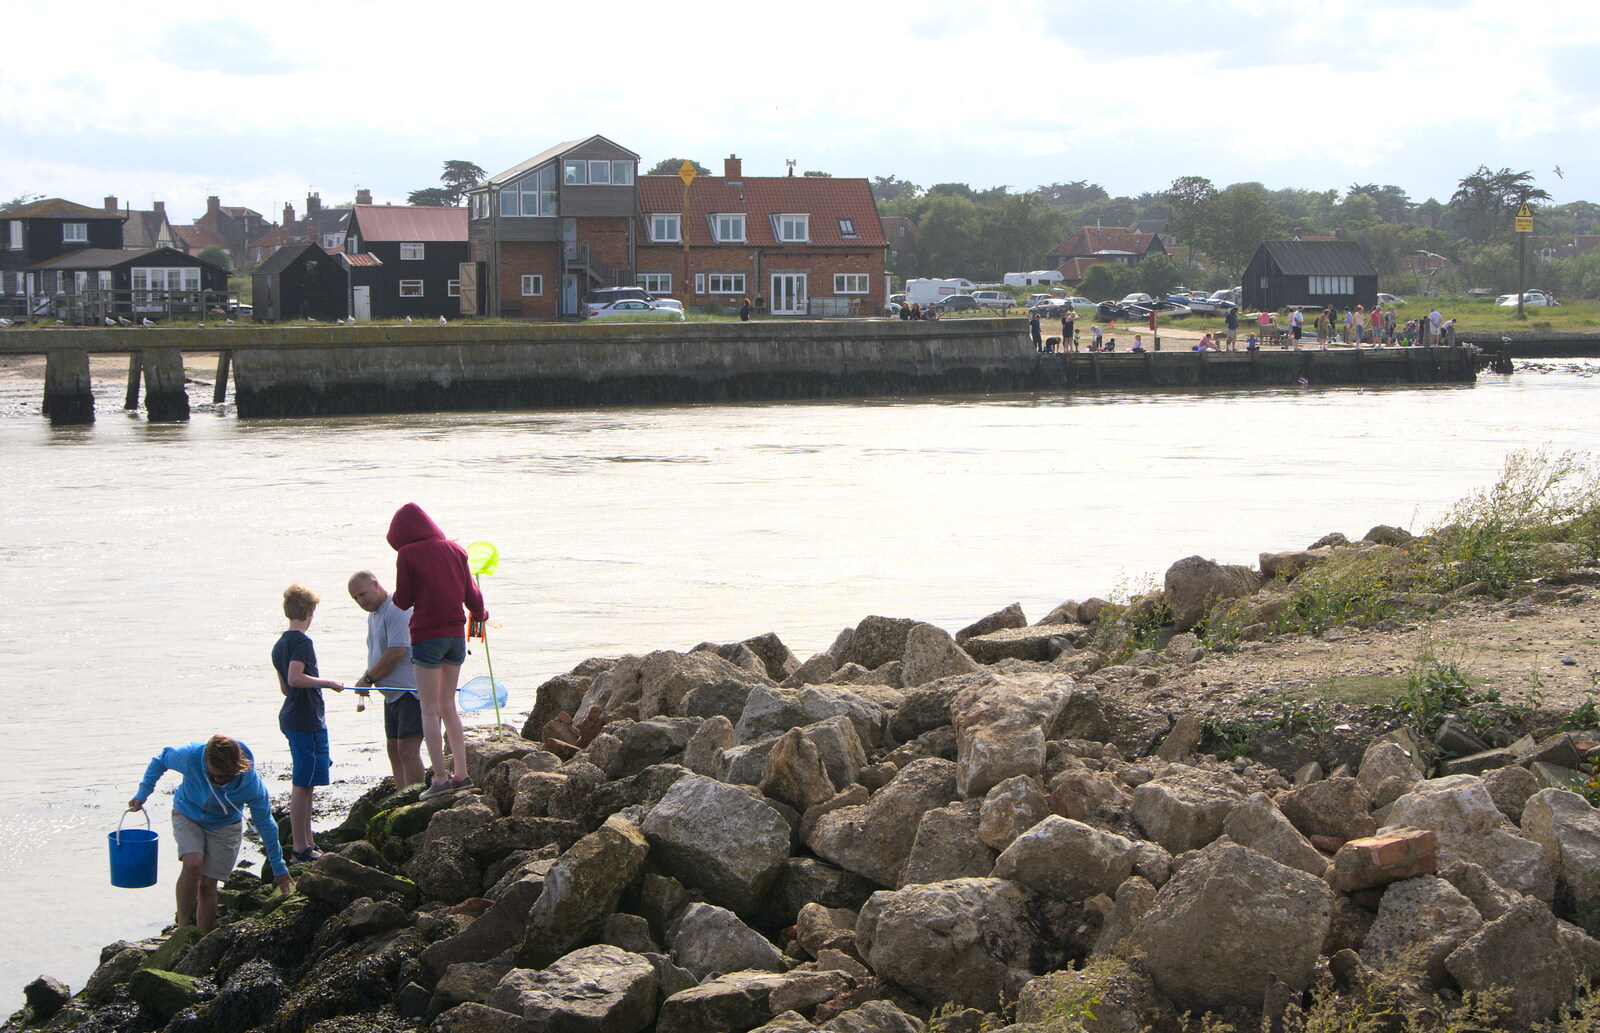 Crabbing on the rocks from The Danger of Trees: A Camping (Mis)adventure - Southwold, Suffolk - 3rd August 2015